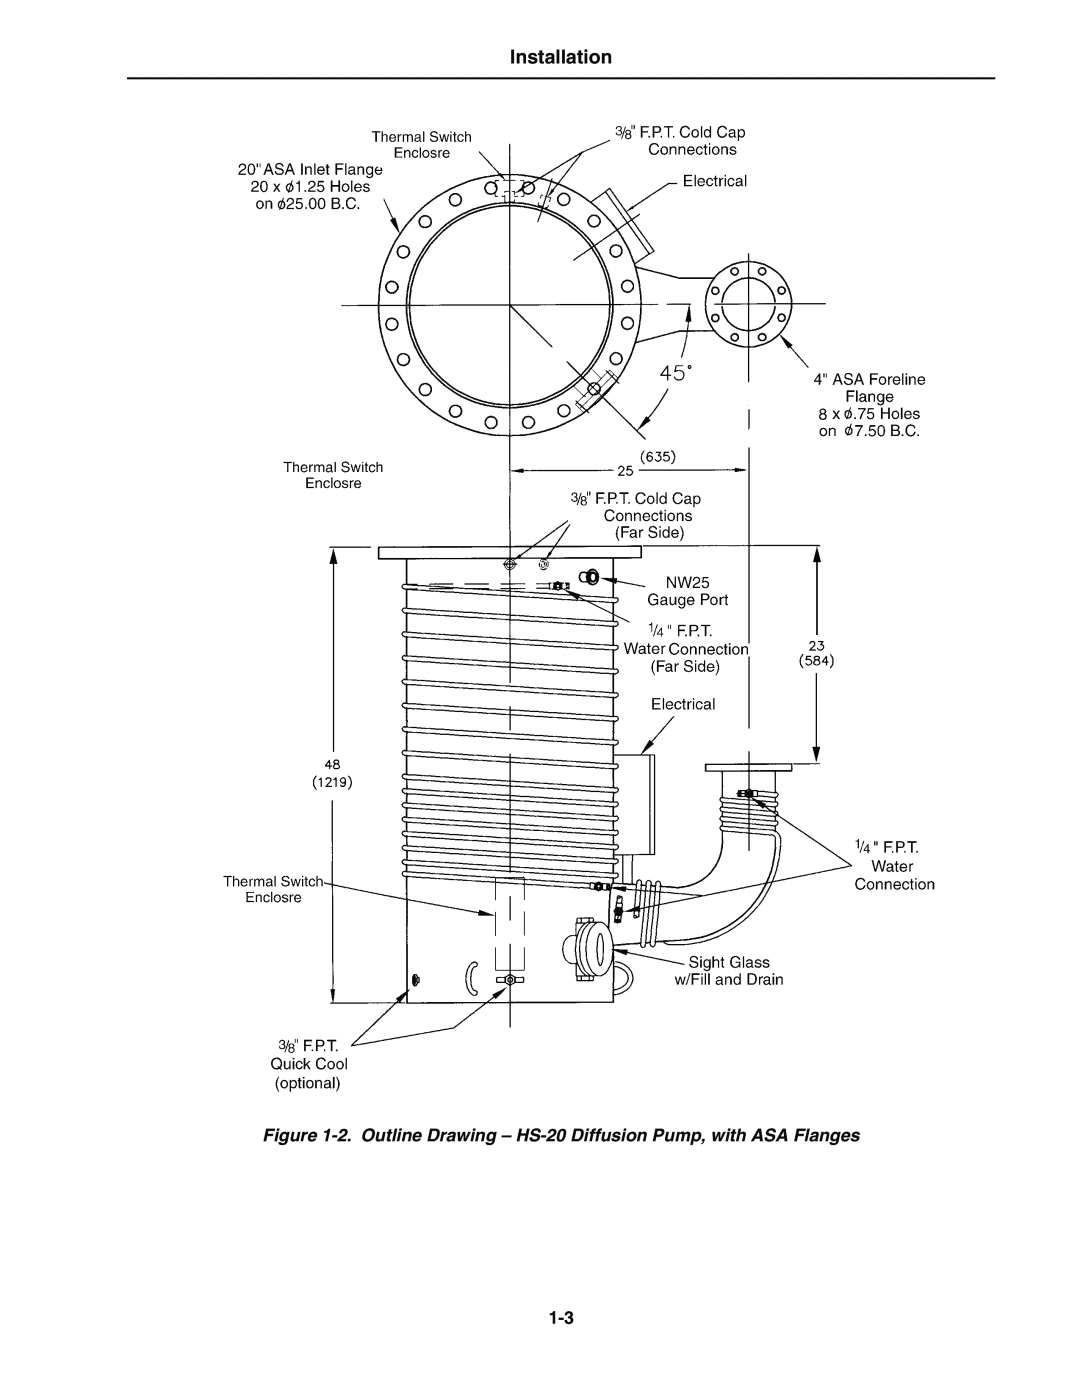 Bissell instruction manual Installation, 2. Outline Drawing - HS-20 Diffusion Pump, with ASA Flanges 